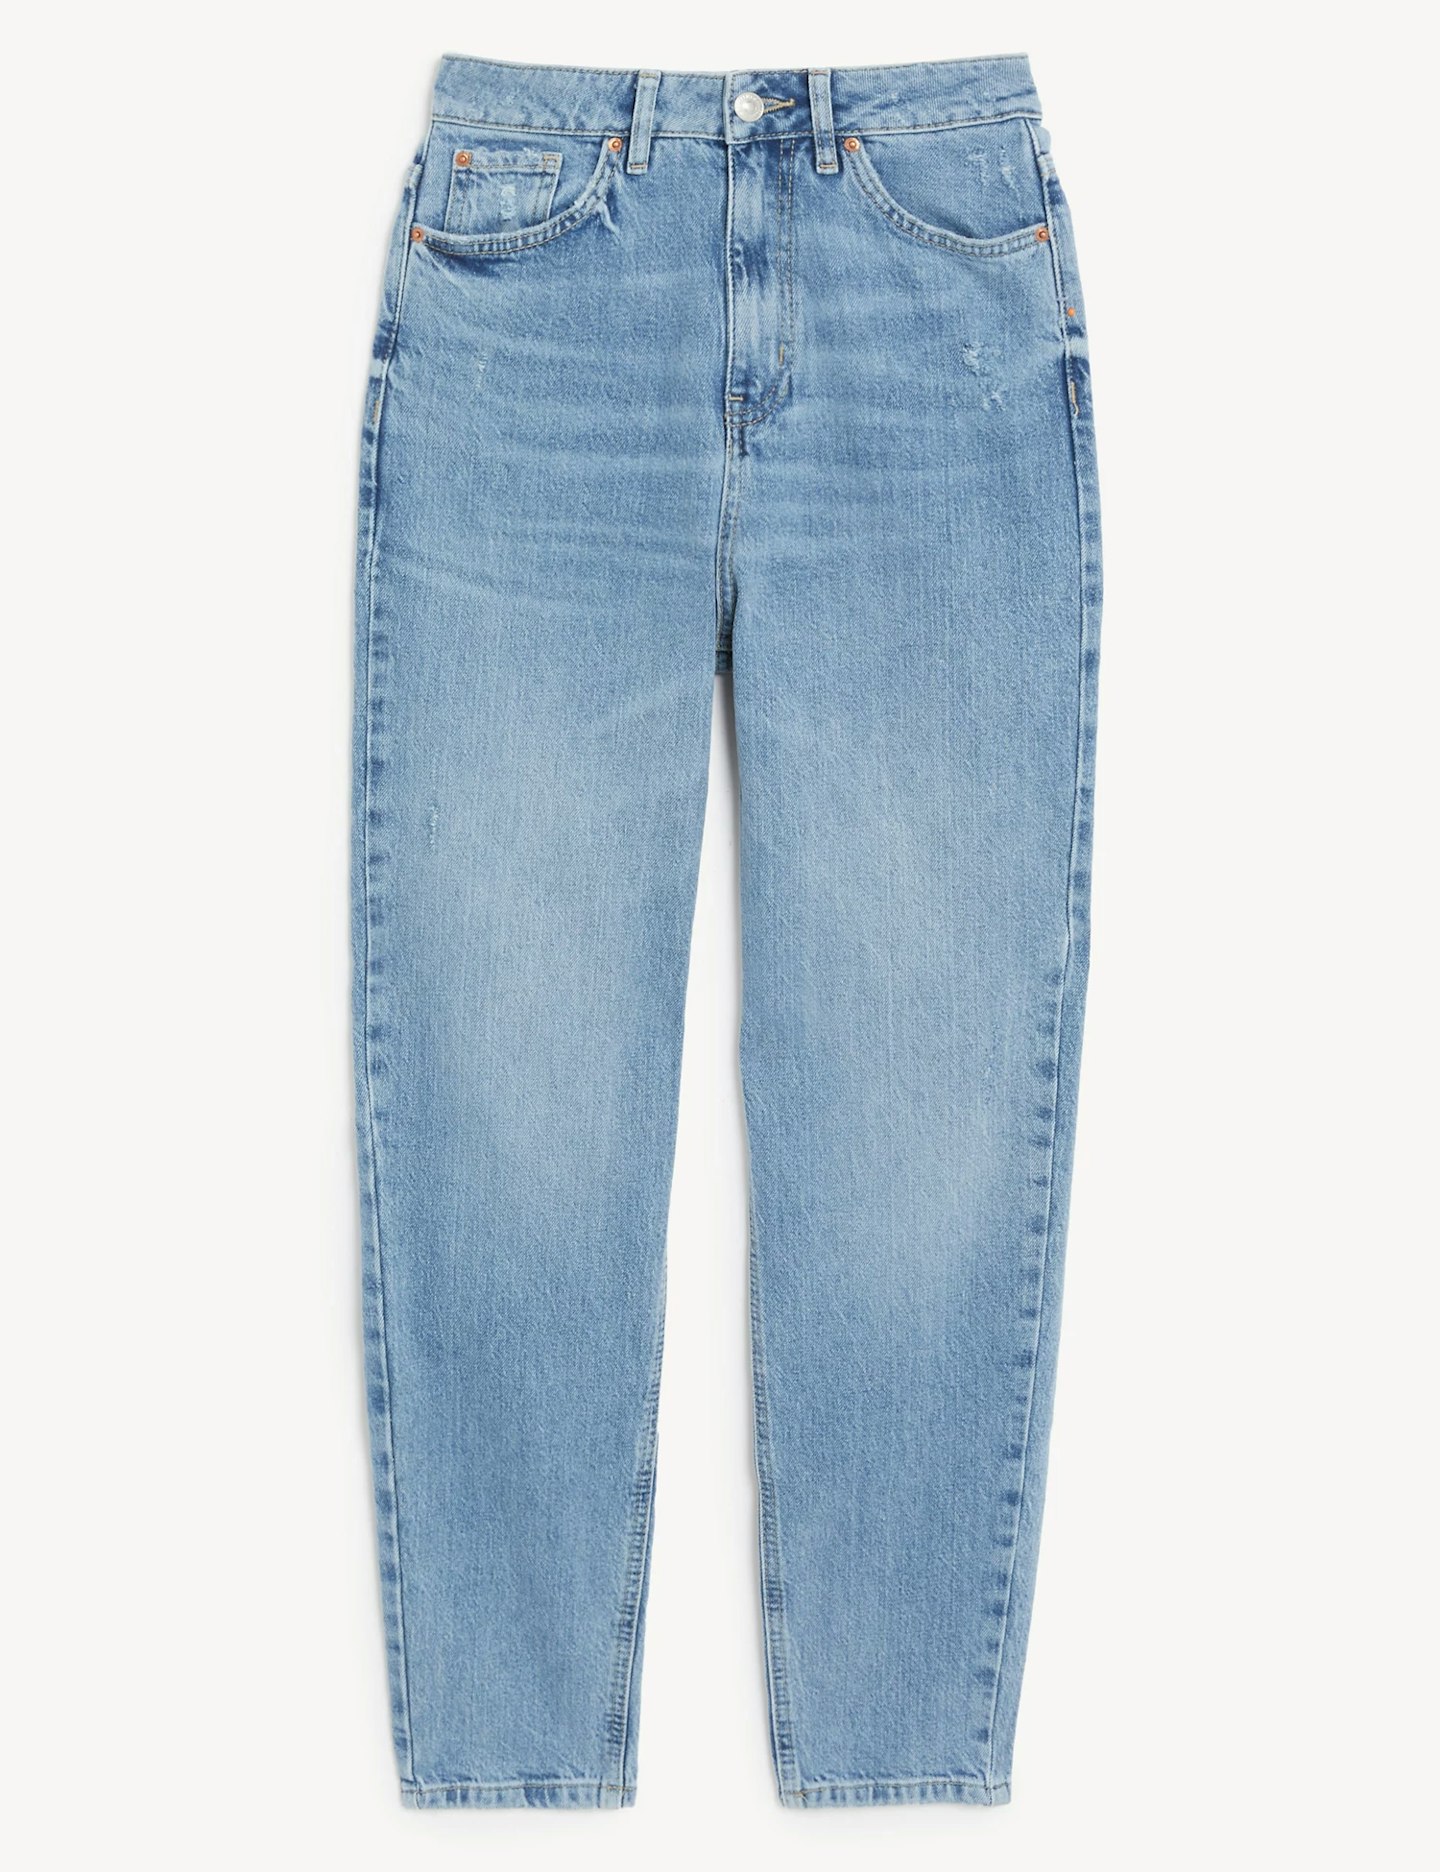 M&S, The Mom Jeans